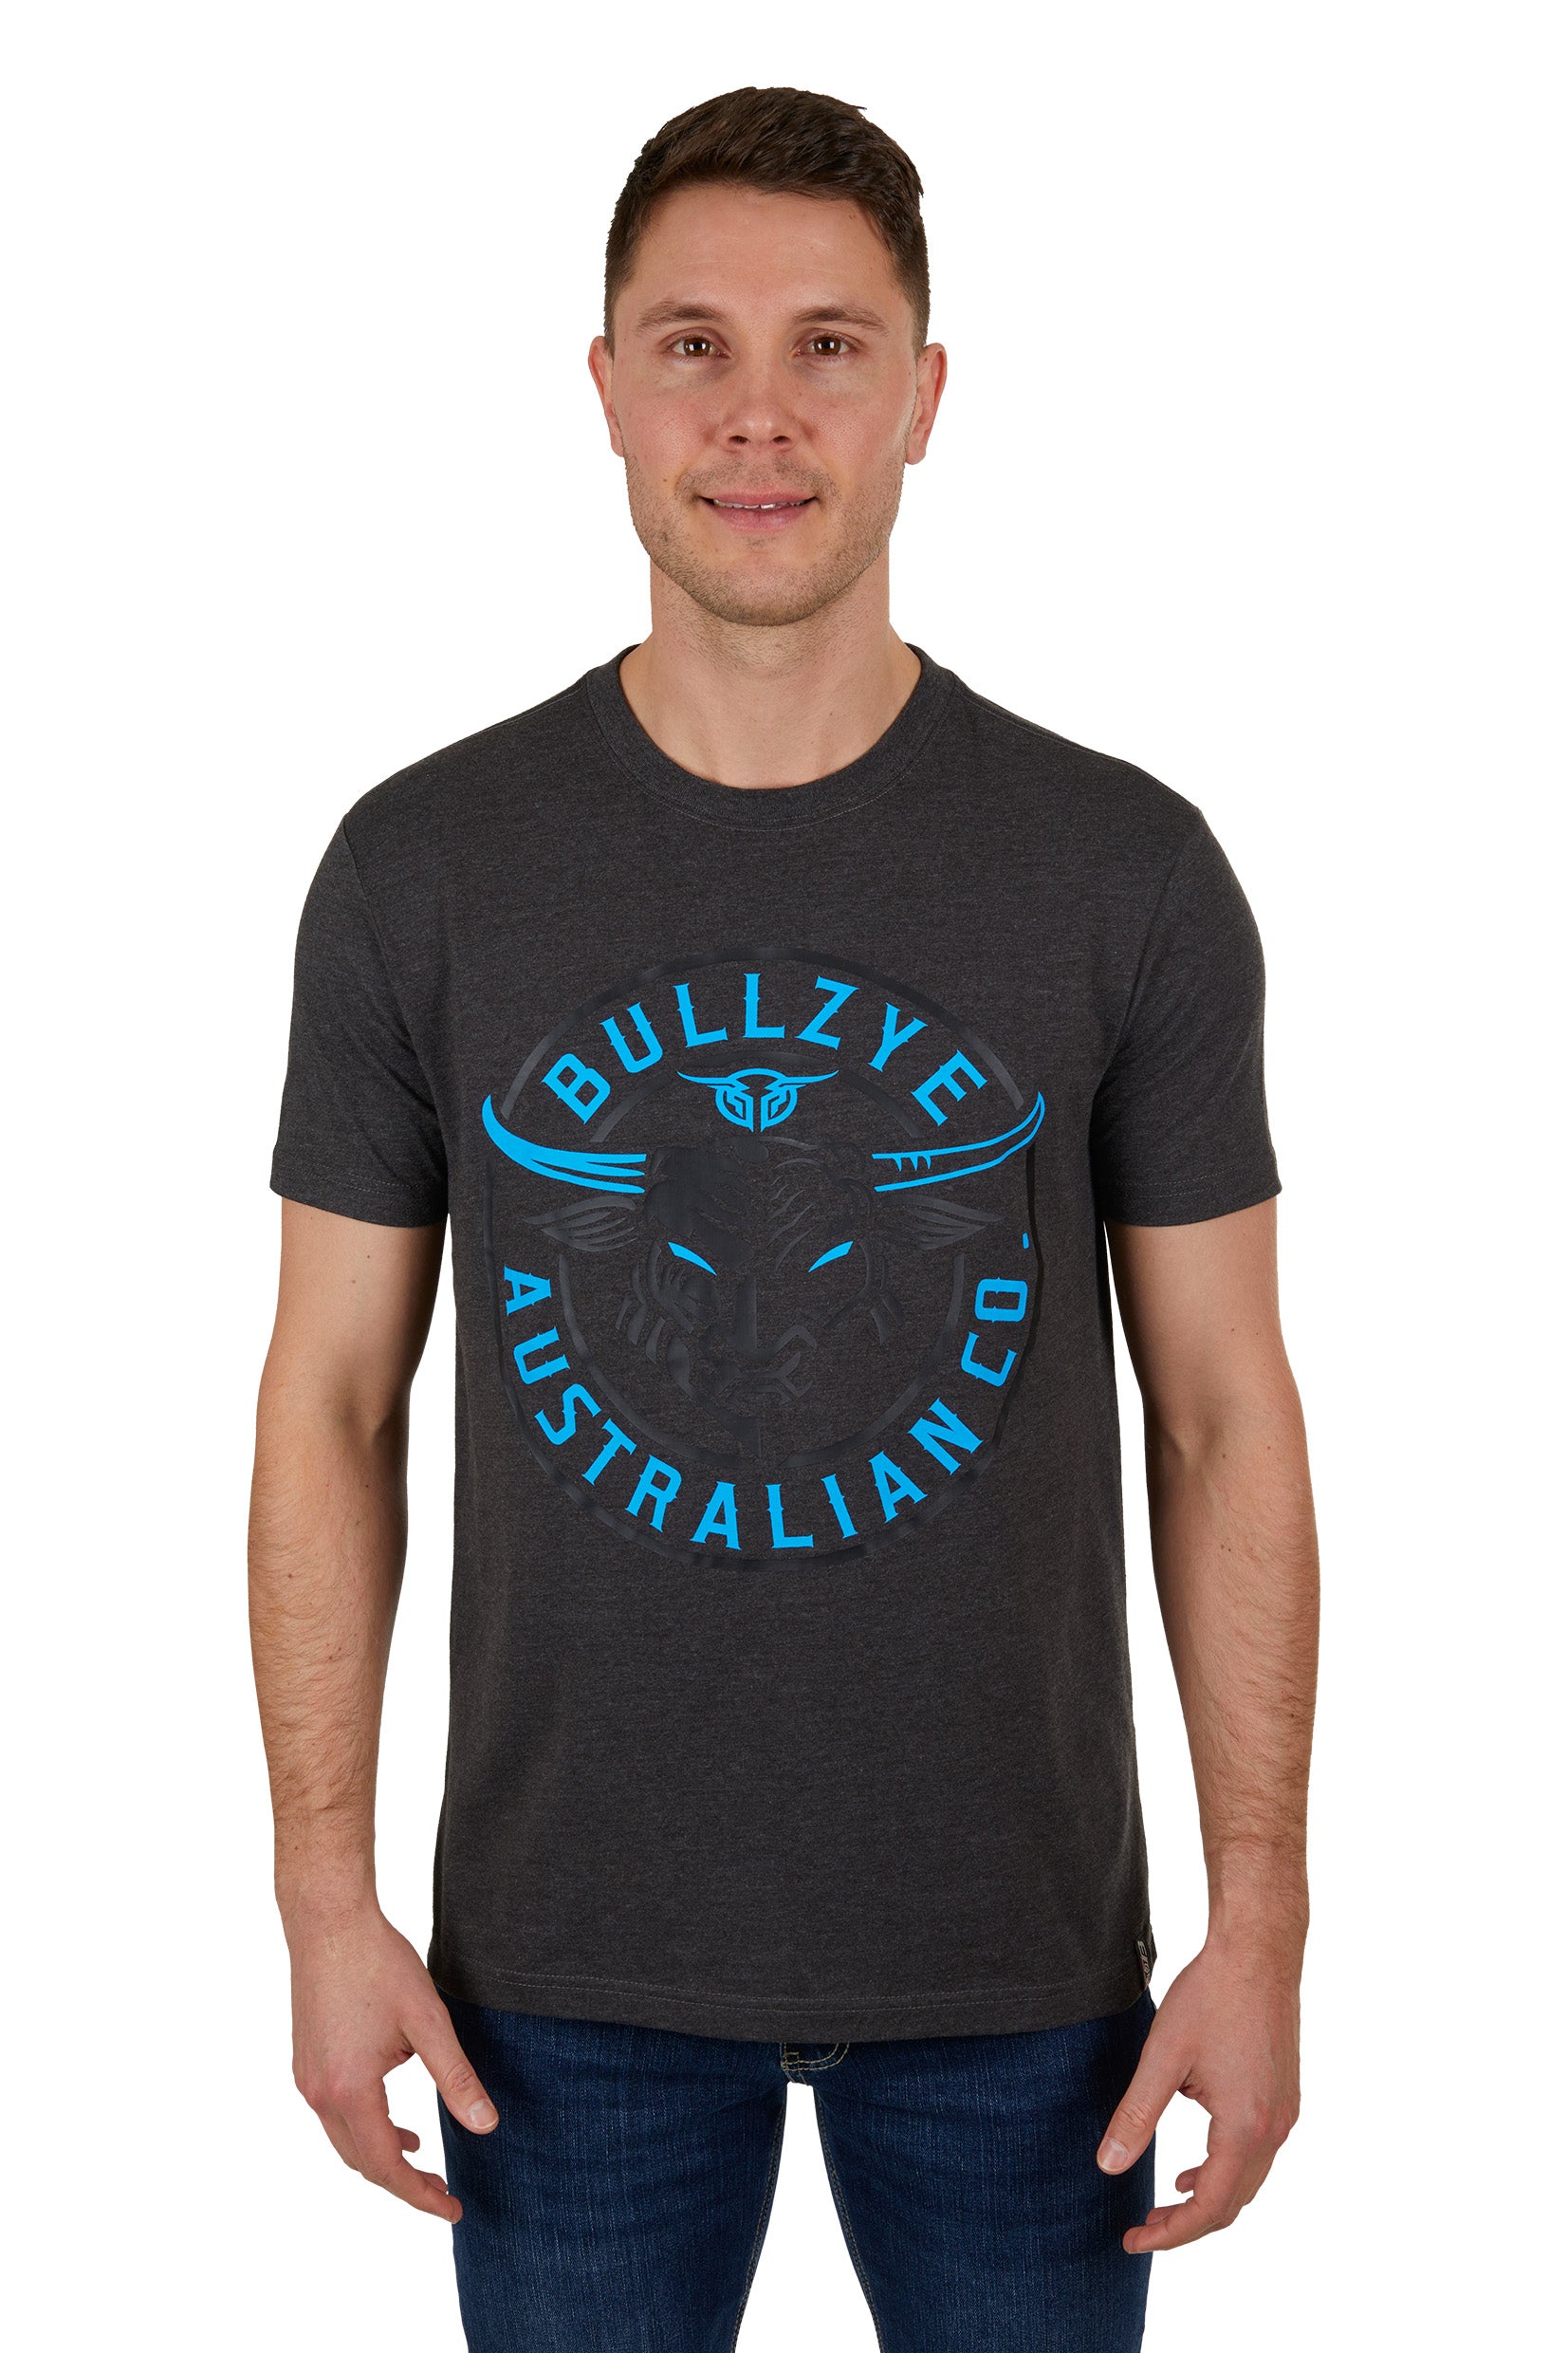 Bullzye Men's Alan Tee - The Trading Stables